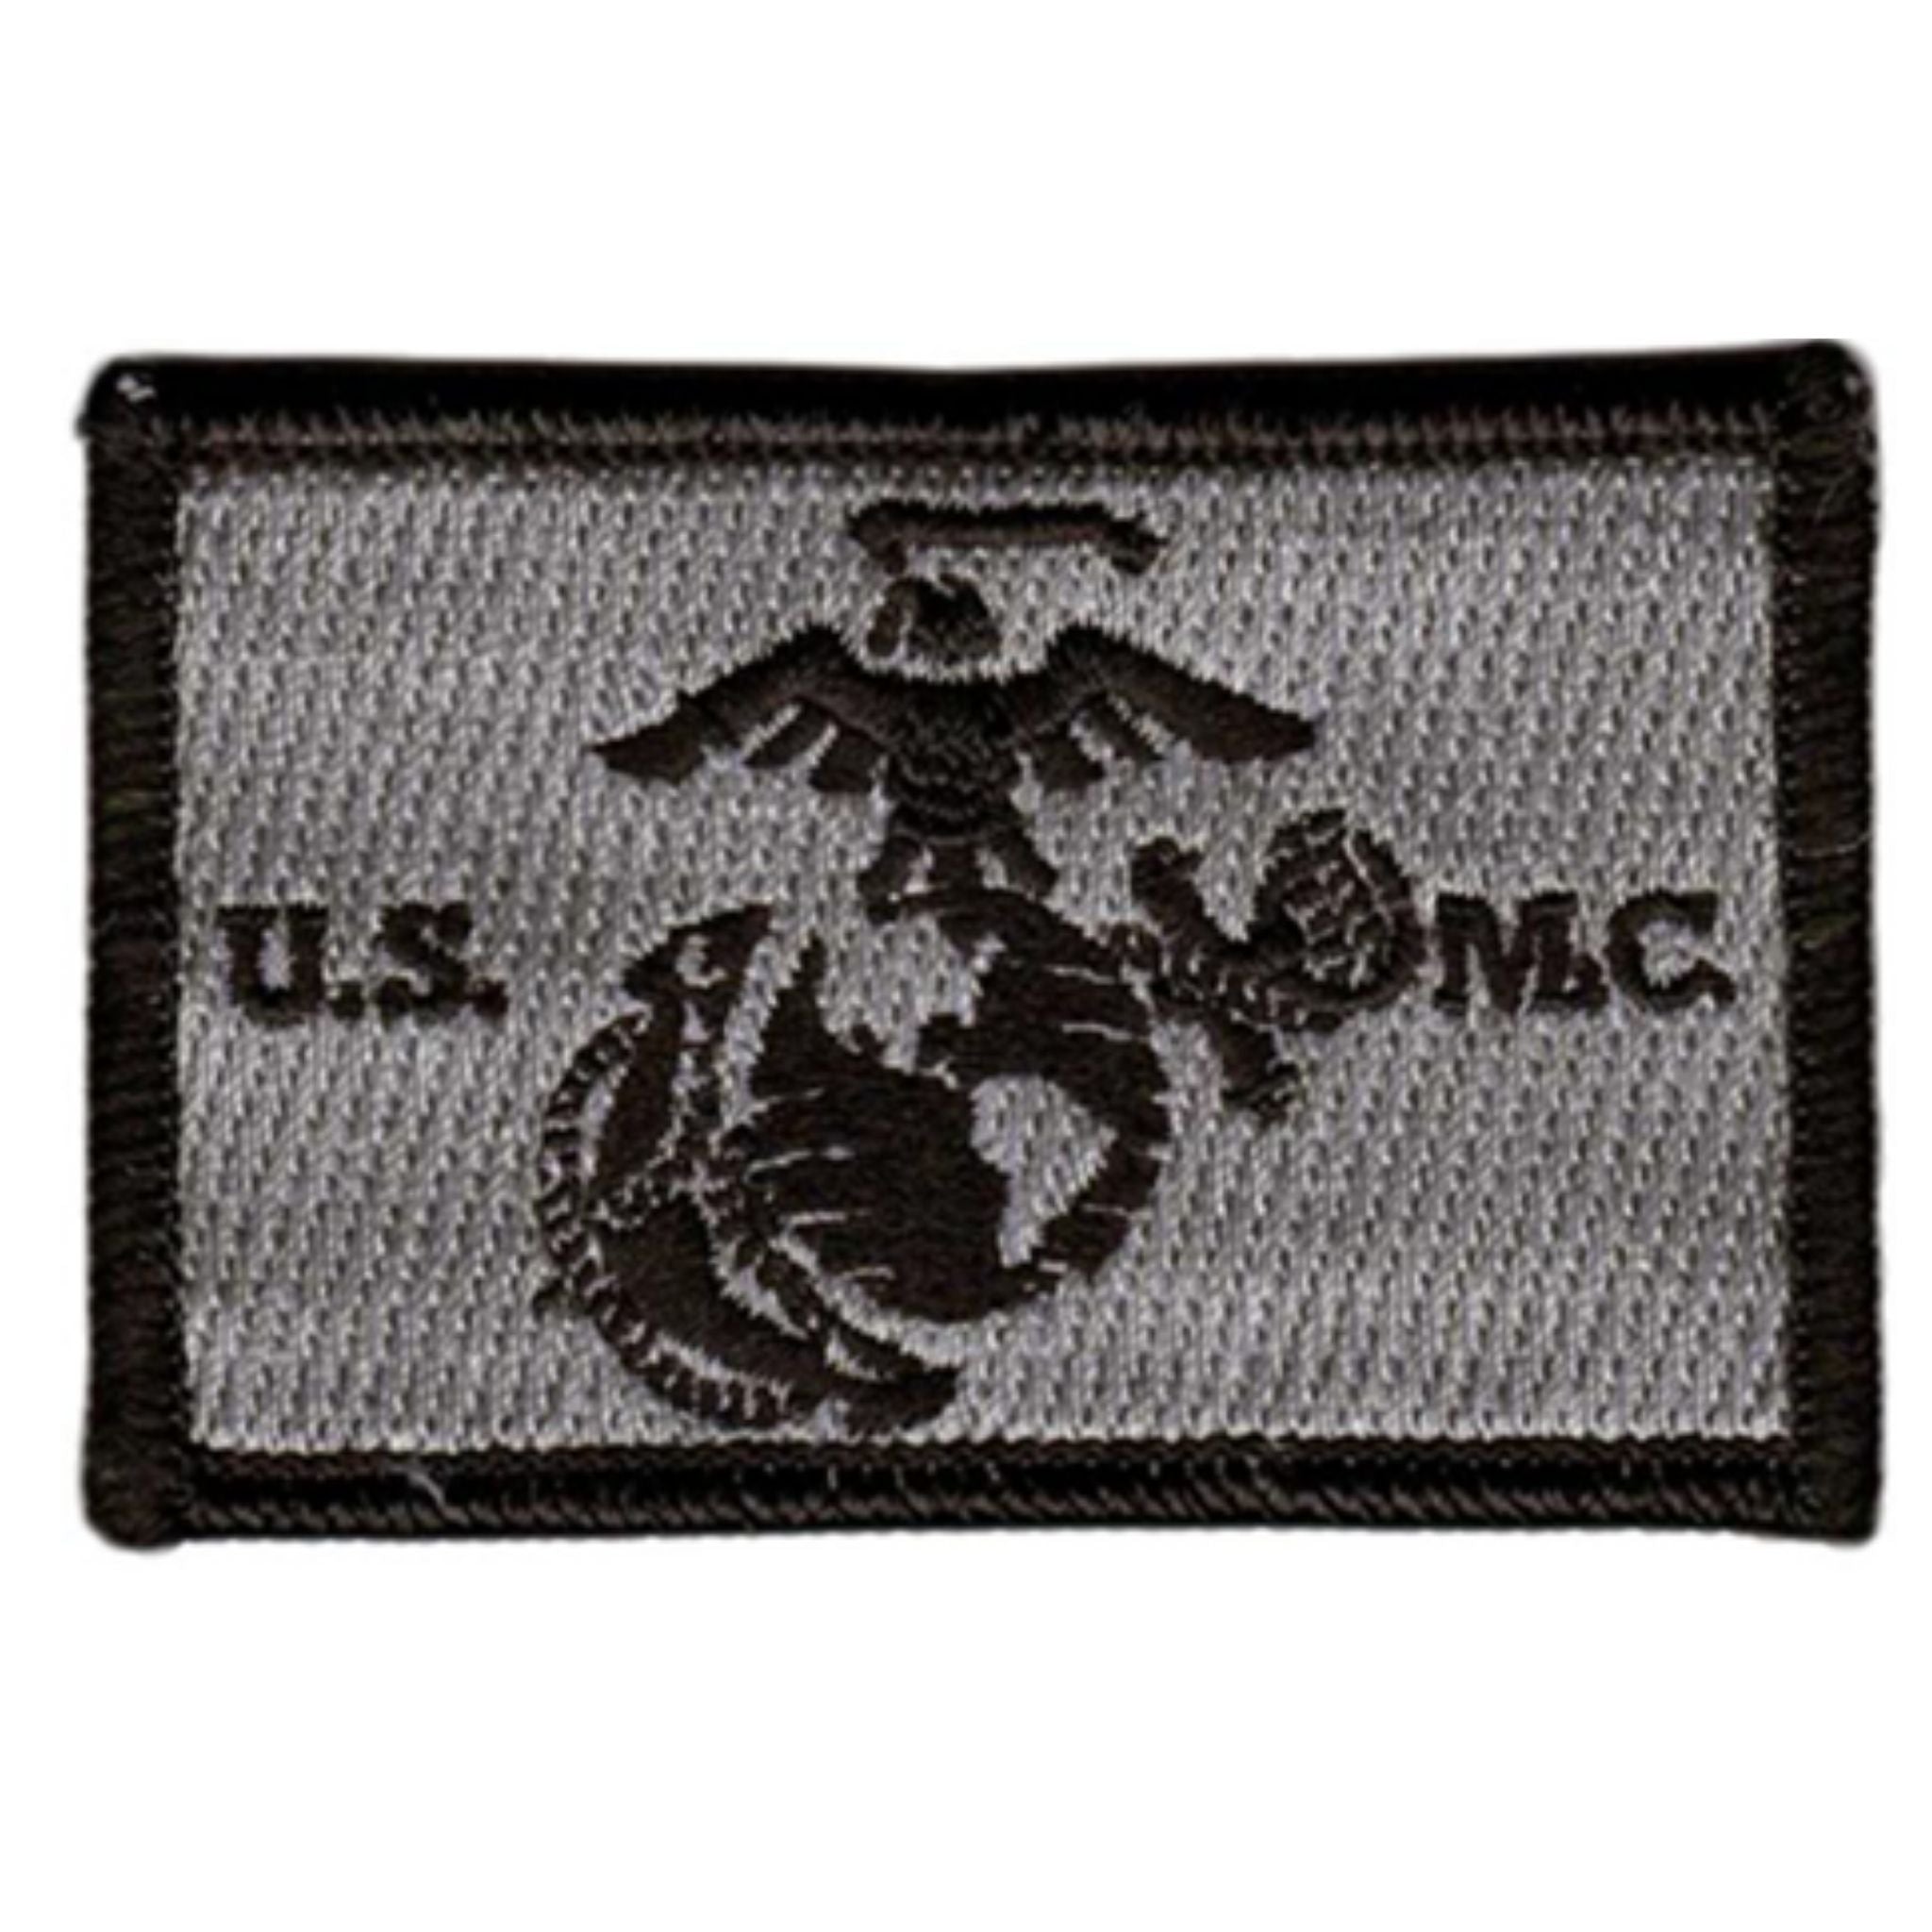 United States Marine Corps Subdued Patch